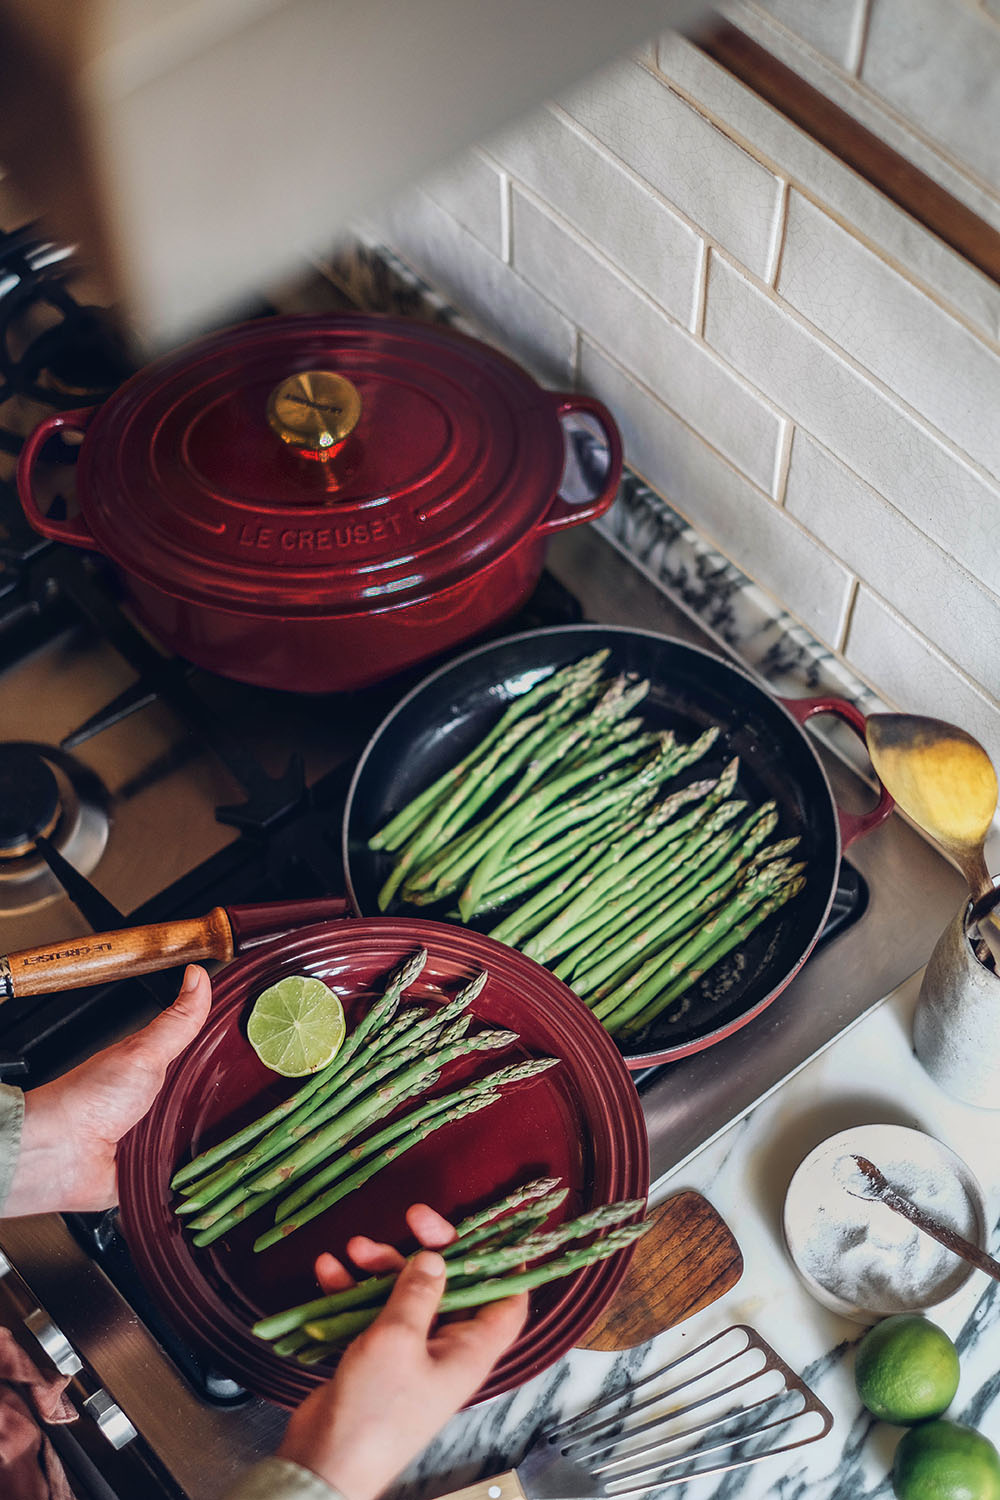 Le creuset cooking